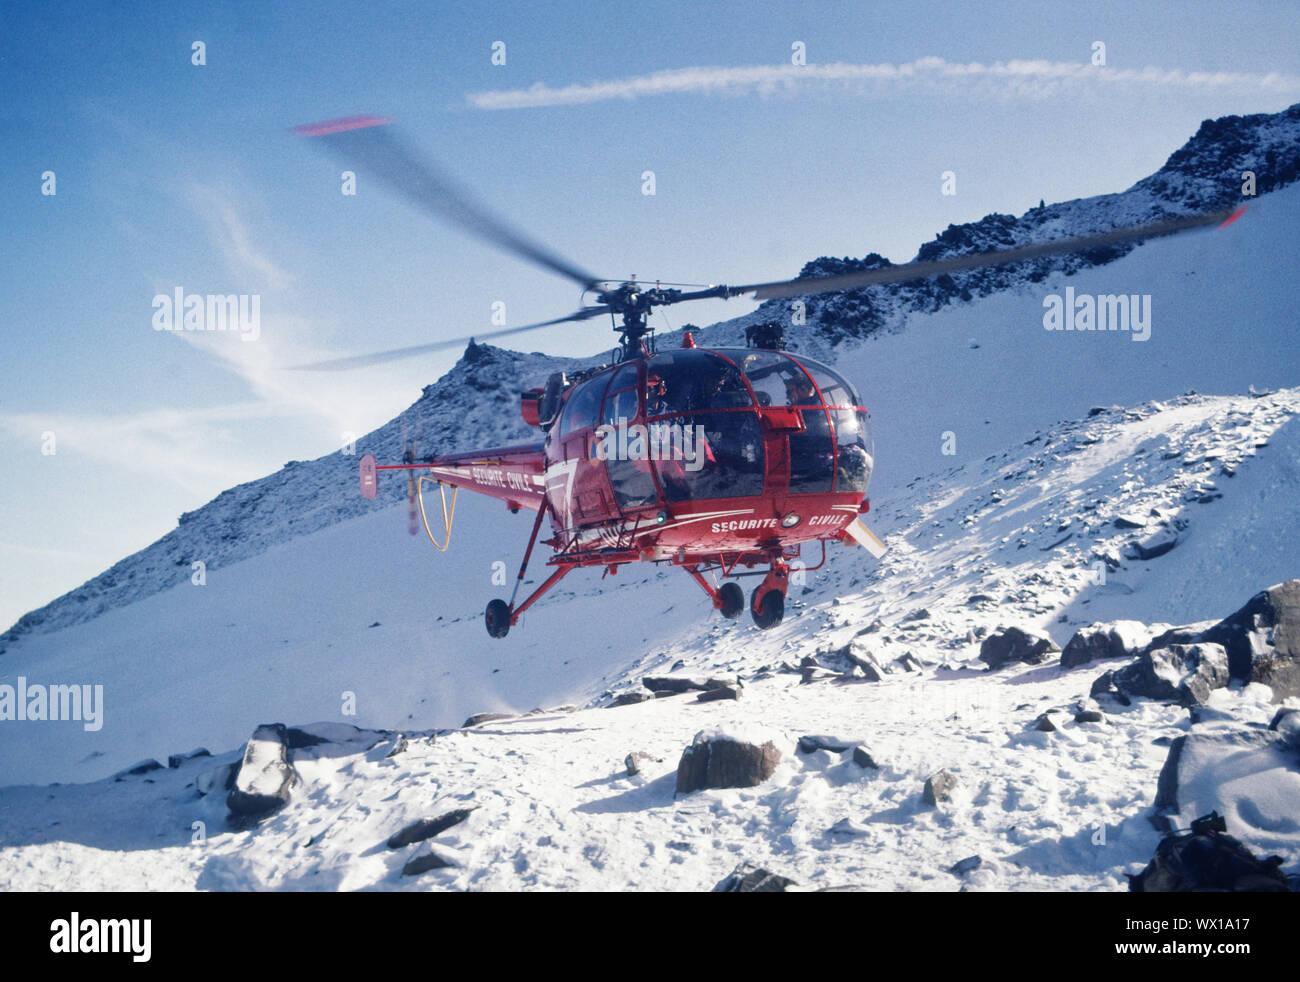 A red rescue helicopter departs from the Tete Rousse hut for a high altitude rescue, Chamonix, France. Stock Photo